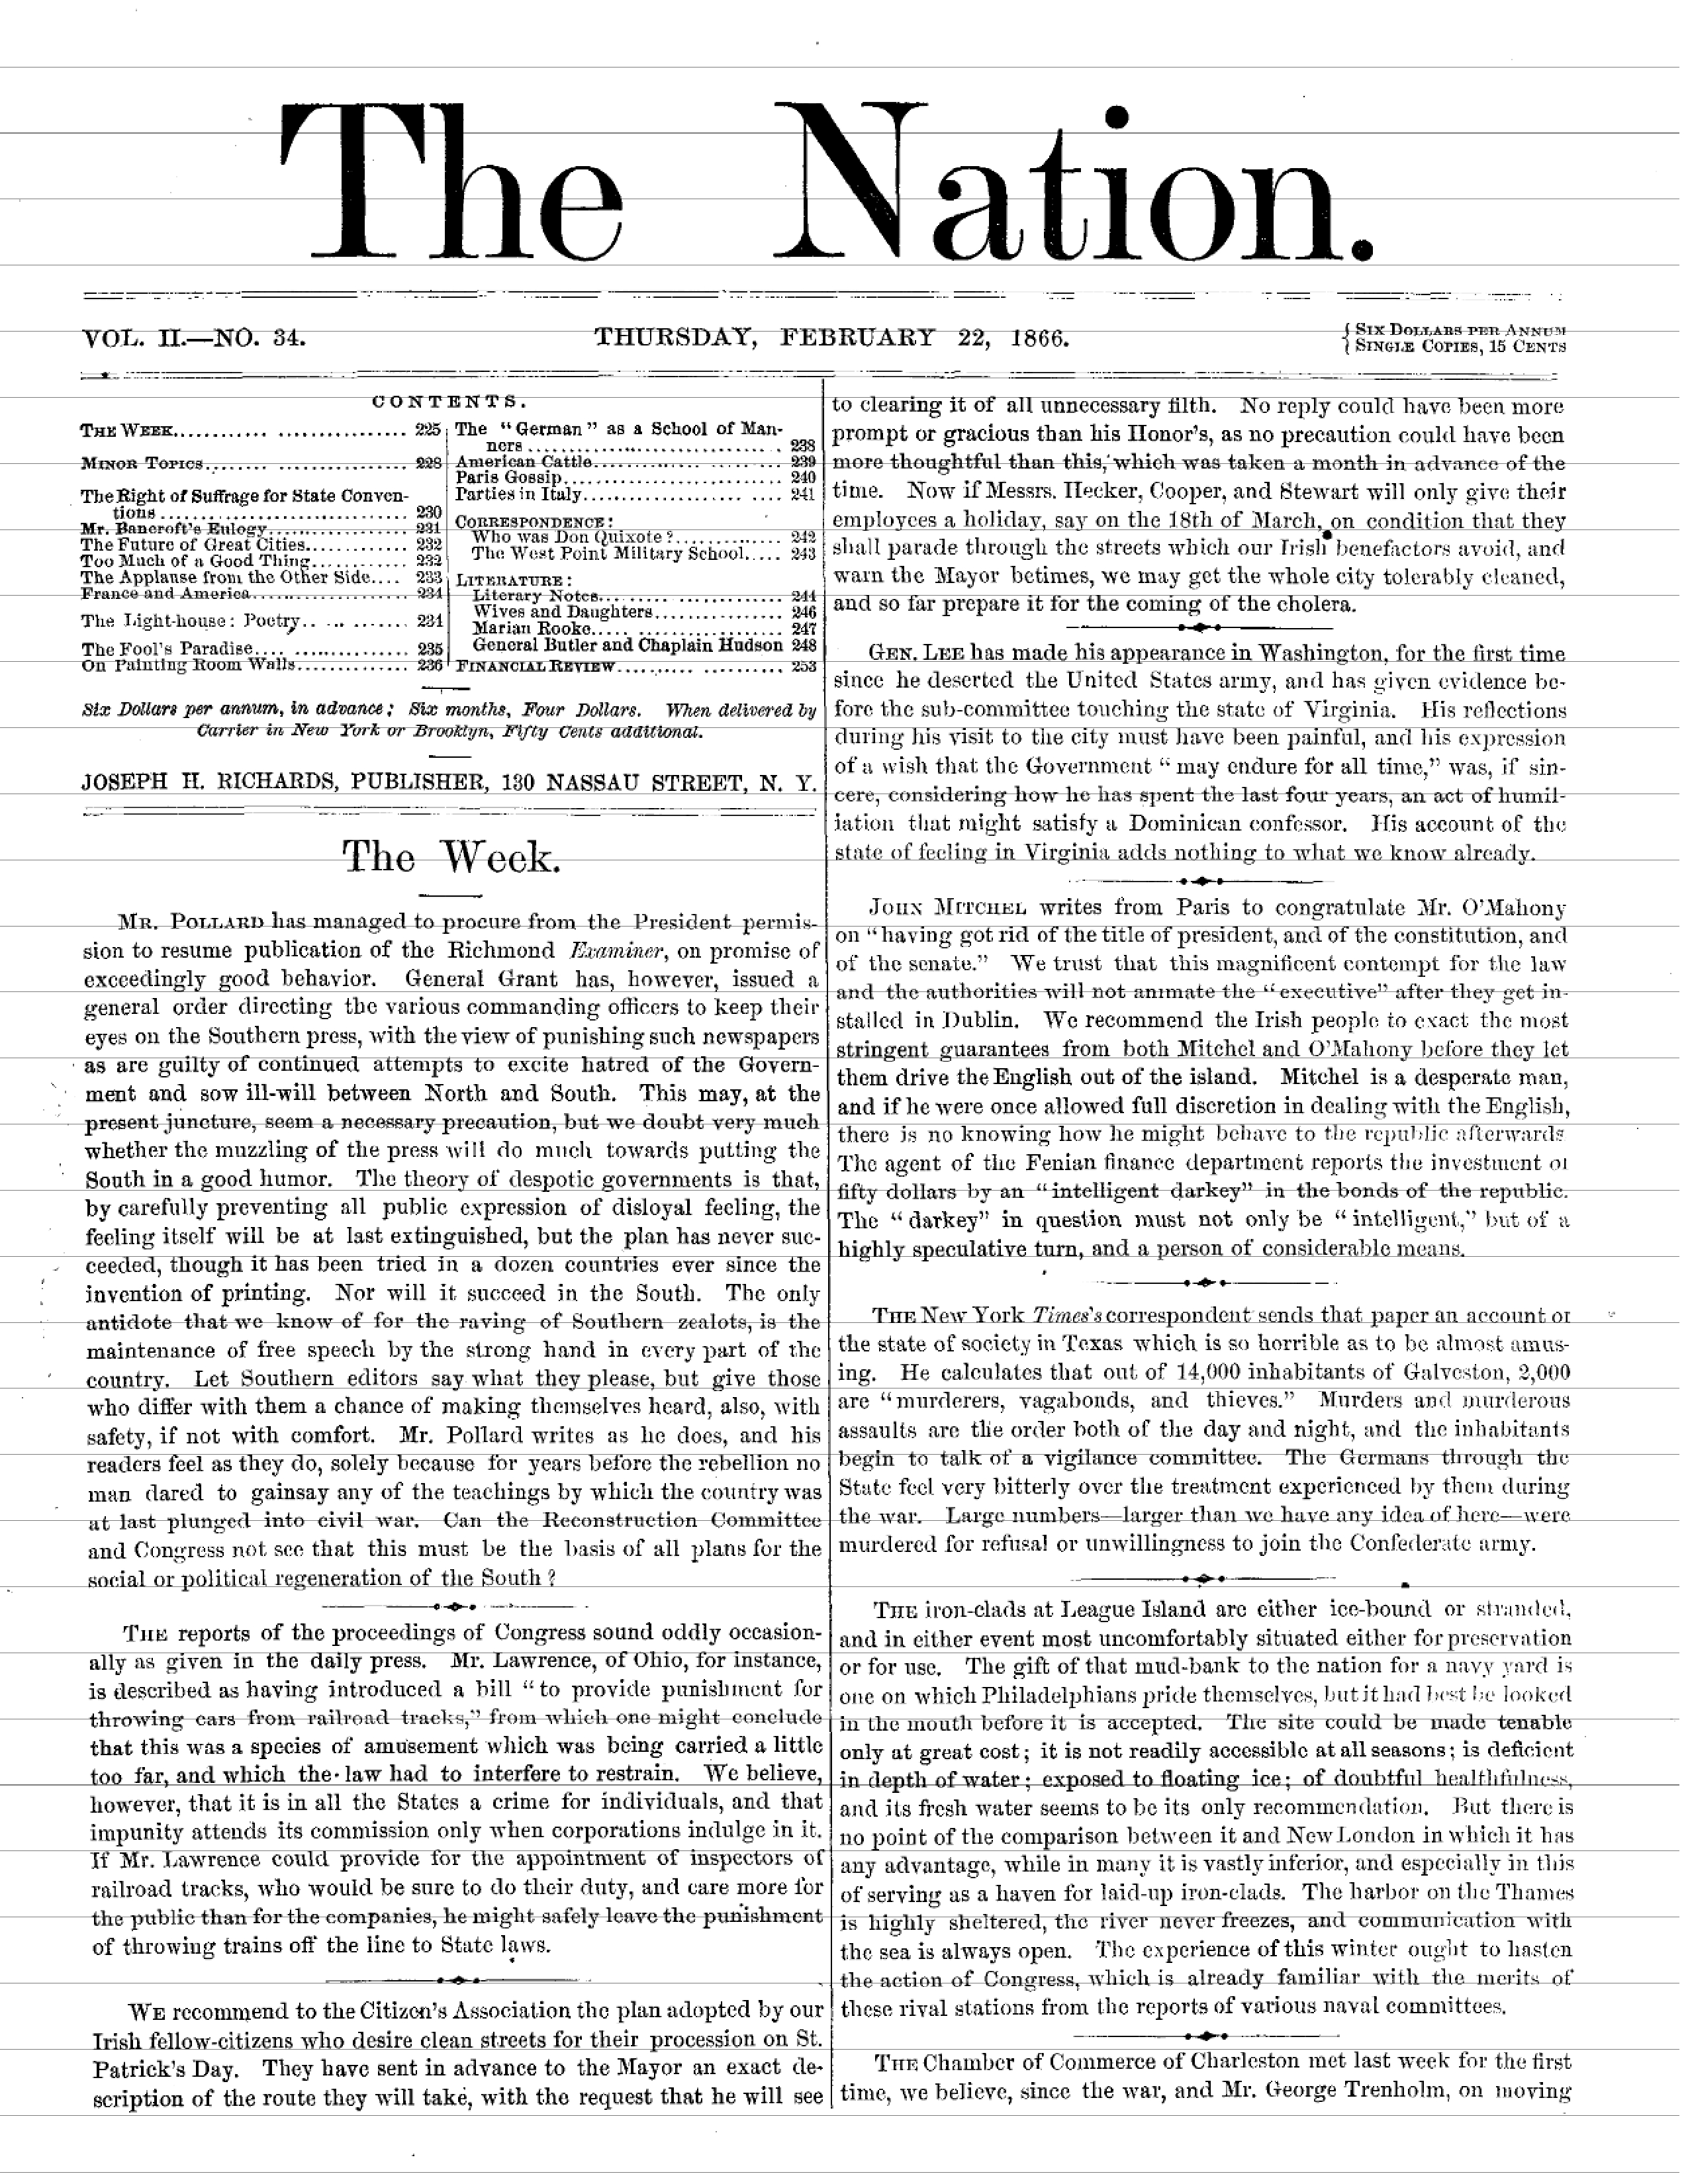 Image result for "the nation" 1866